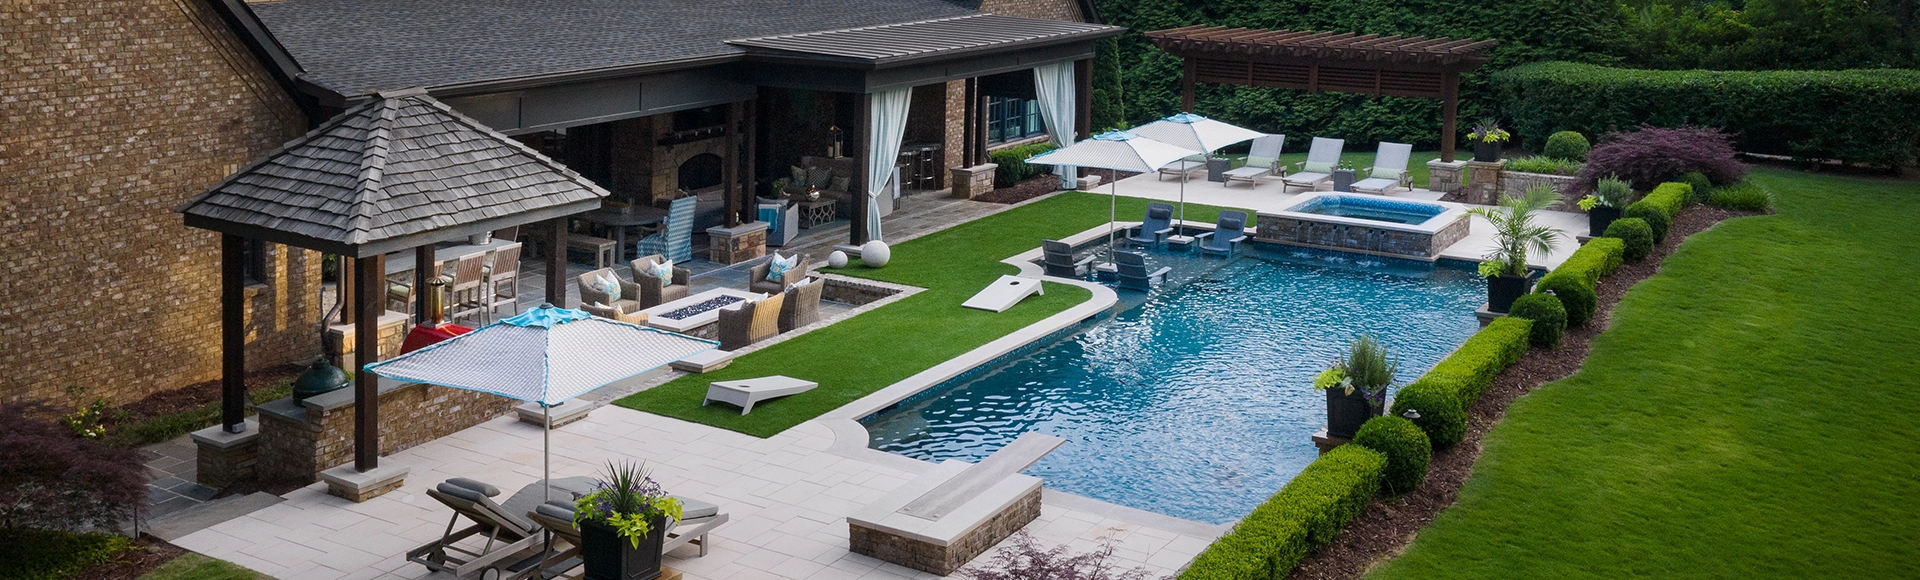 Large space with paving stone pool deck and turf lawn